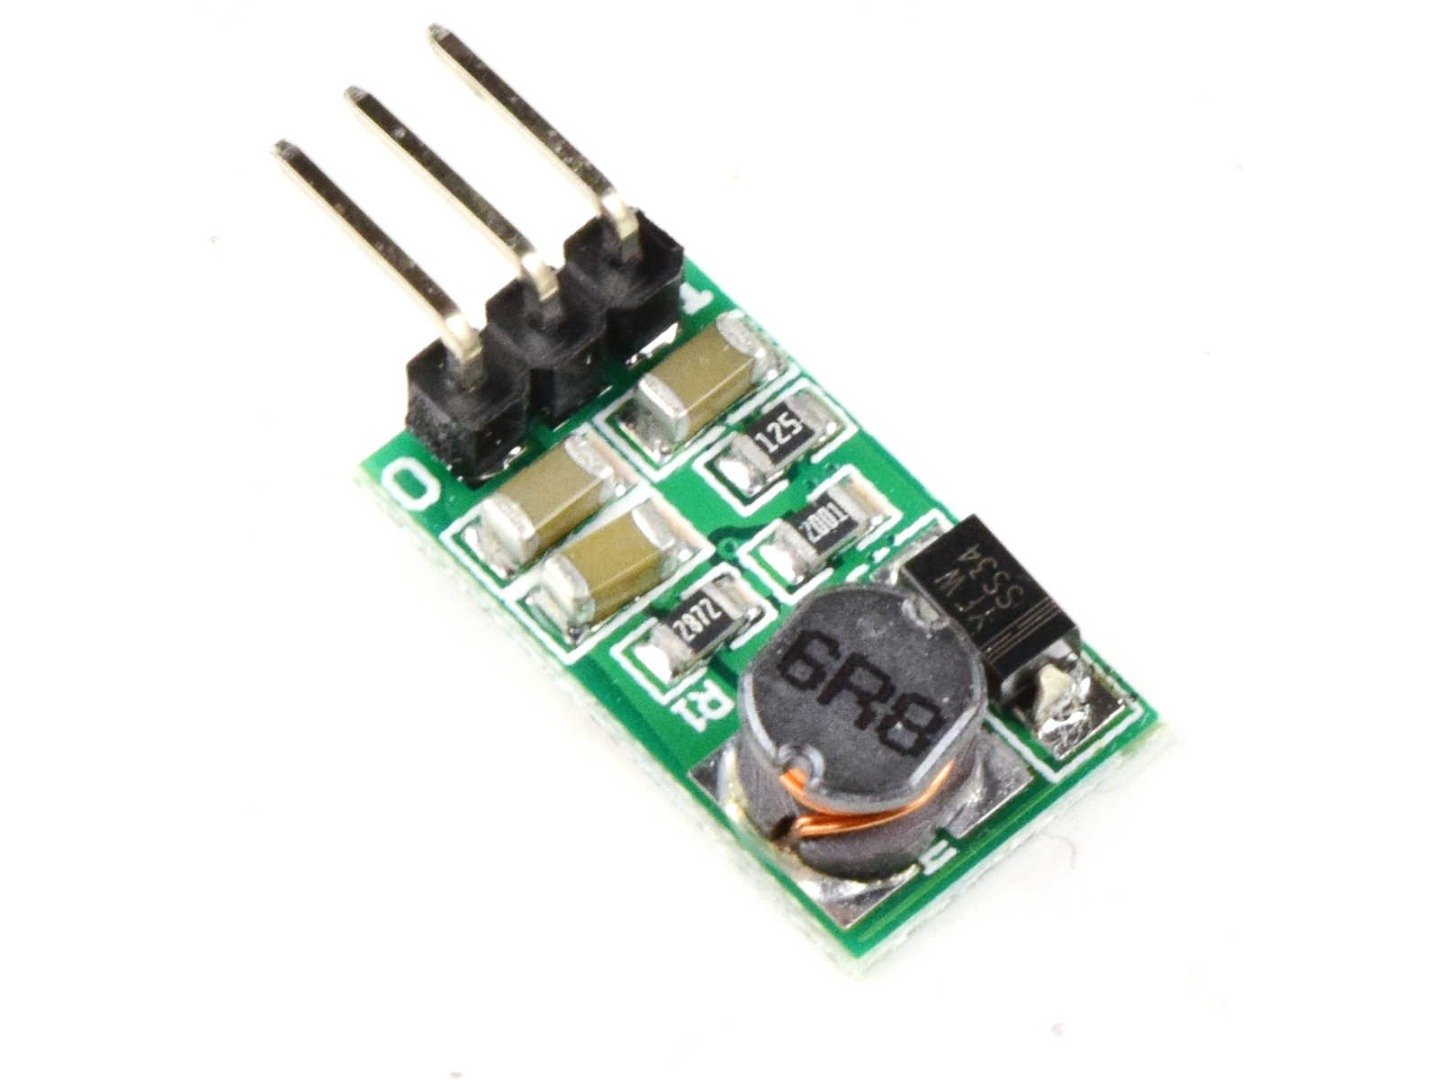 DC-DC Switching Regulator 12V 0.5A – TO-220 pinout – 7812 Replacement 5